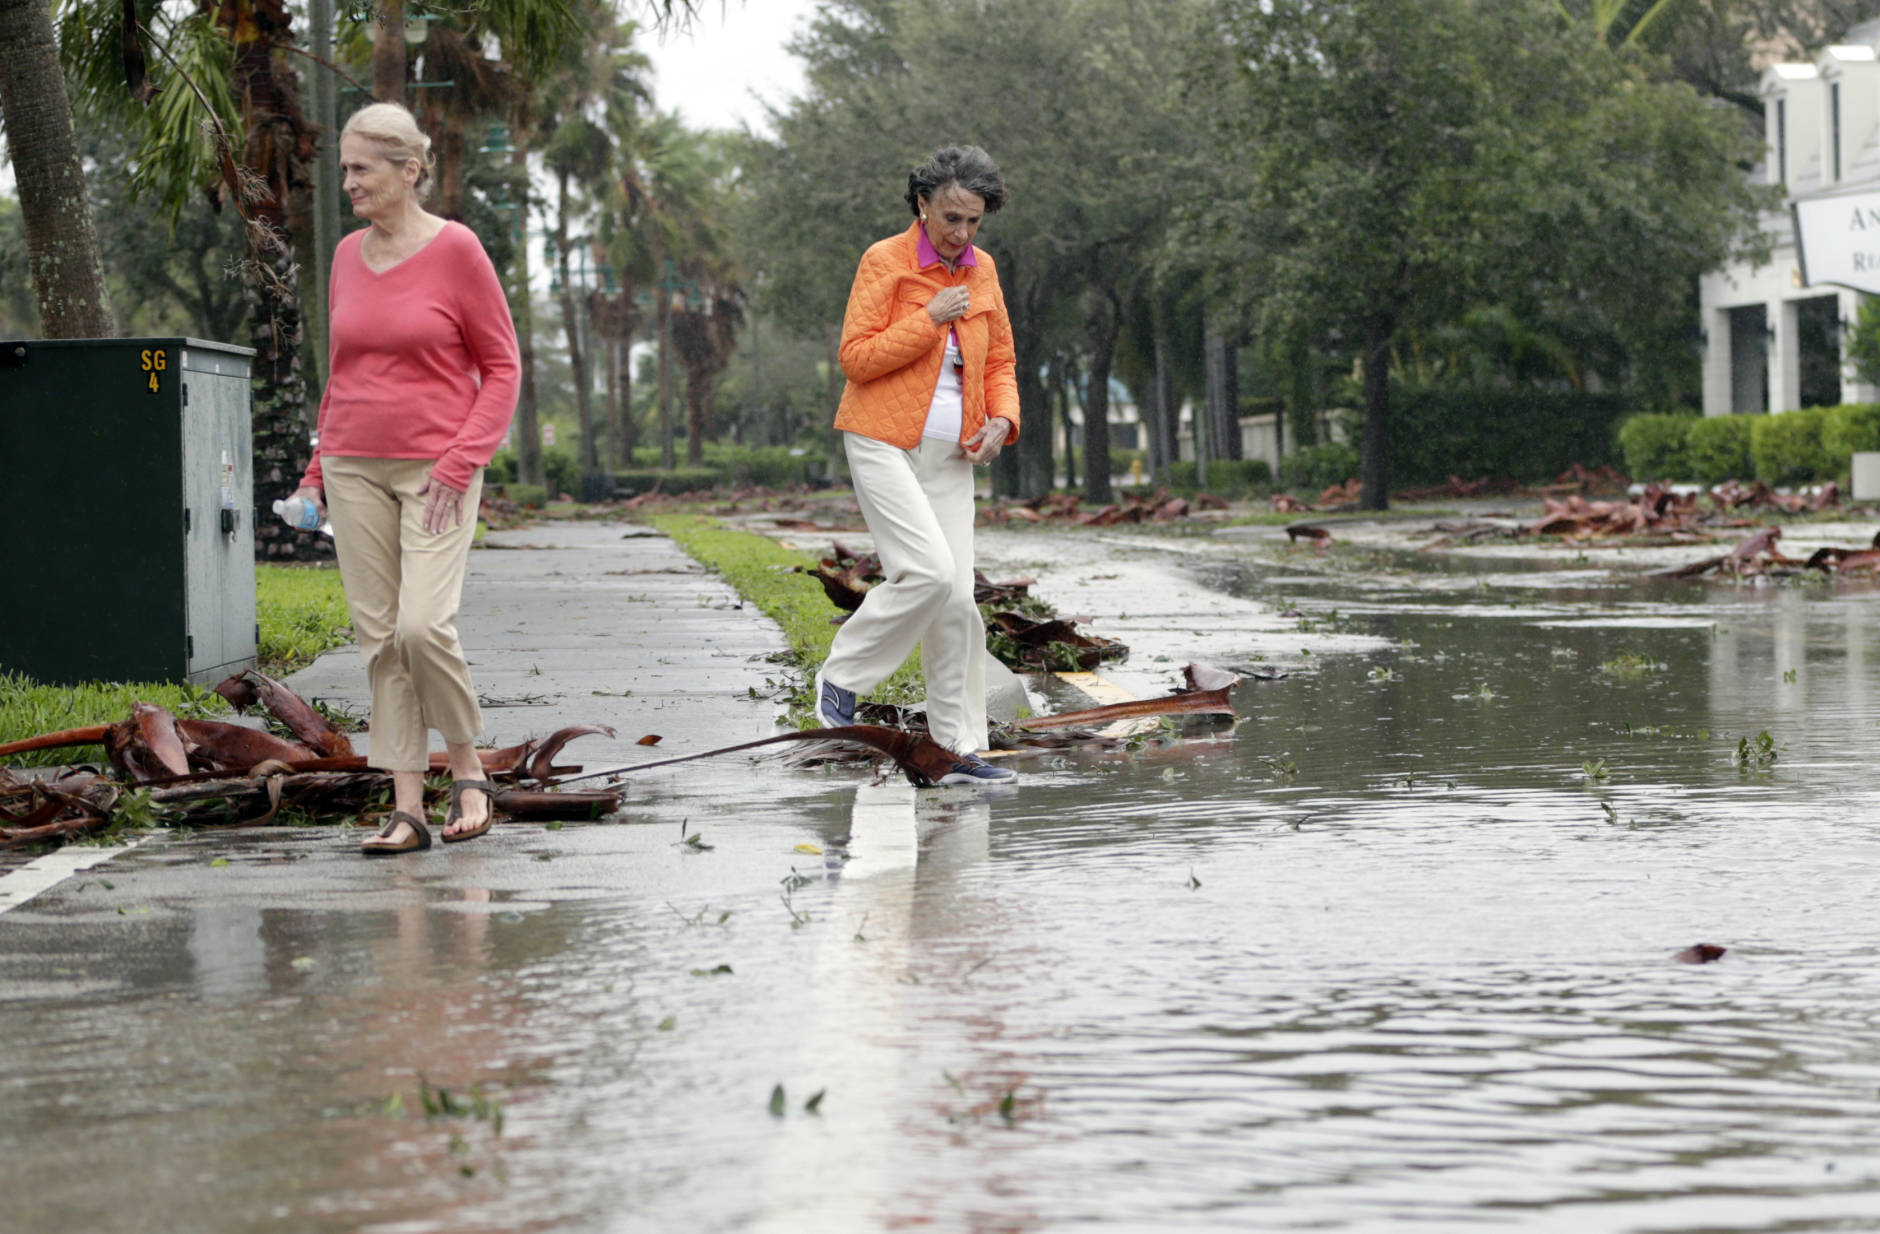 Sherry McMahon, left, and Joan Maddy, right, assess damage from Hurricane Matthew as they walk along a flooded street in a residential neighborhood along the Indian River, Friday, Oct. 7, 2016, in Vero Beach, Fla. Matthew was downgraded to a Category 3 hurricane overnight with the strongest winds of 120 mph just offshore as the storm pushed north, threatening hundreds of miles of coastline in Florida, Georgia and South Carolina.   (AP Photo/Lynne Sladky)